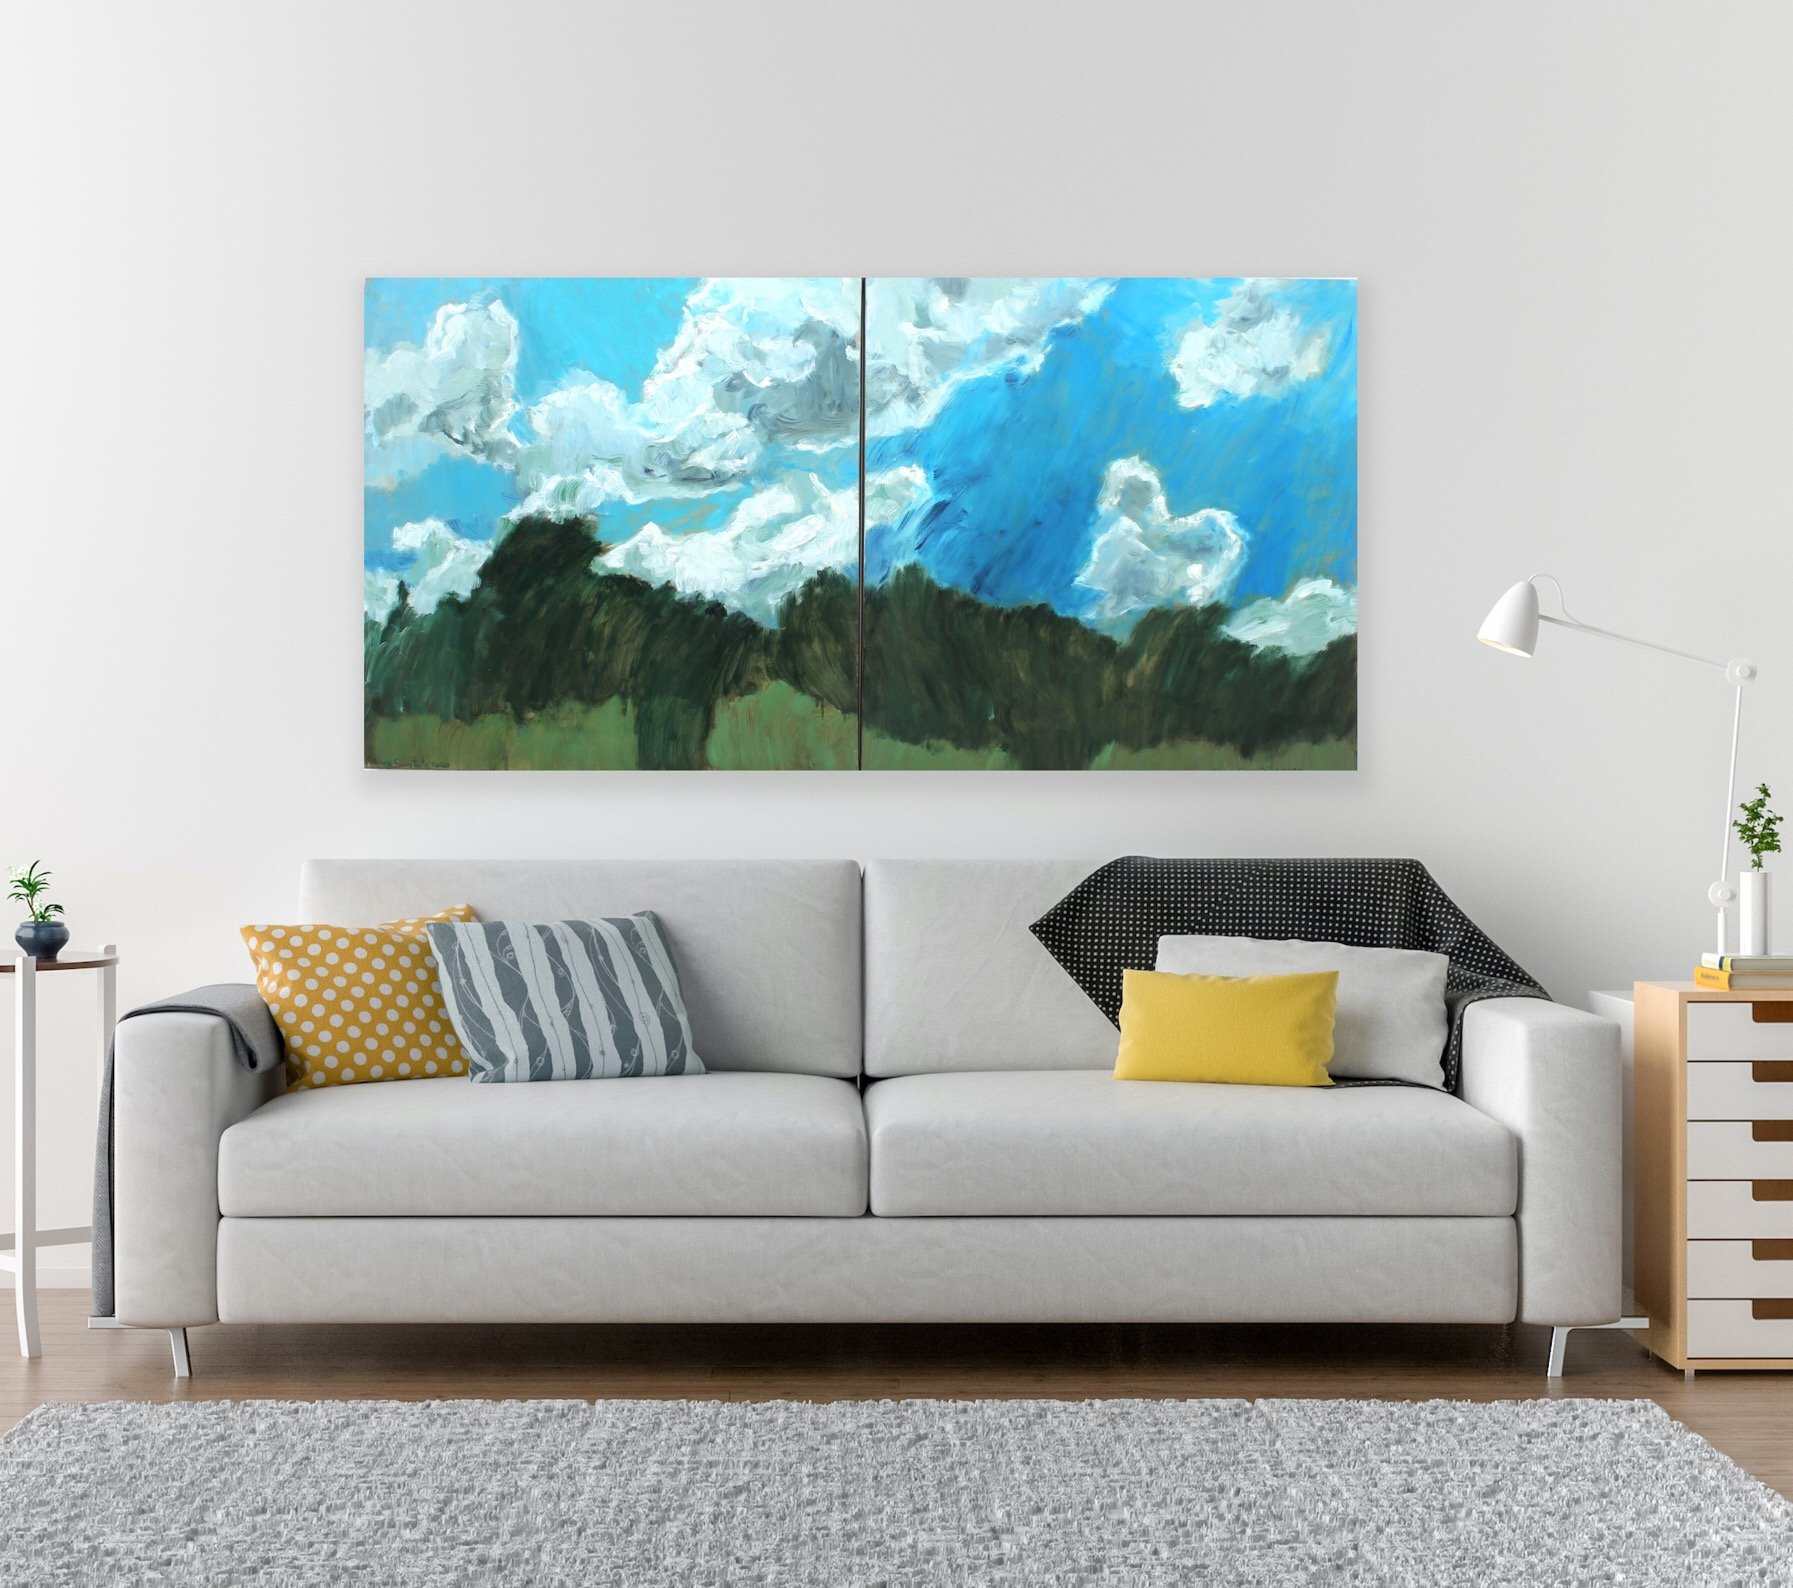 bright-painting-of sky-and-clouds-living-room-decor.JPG